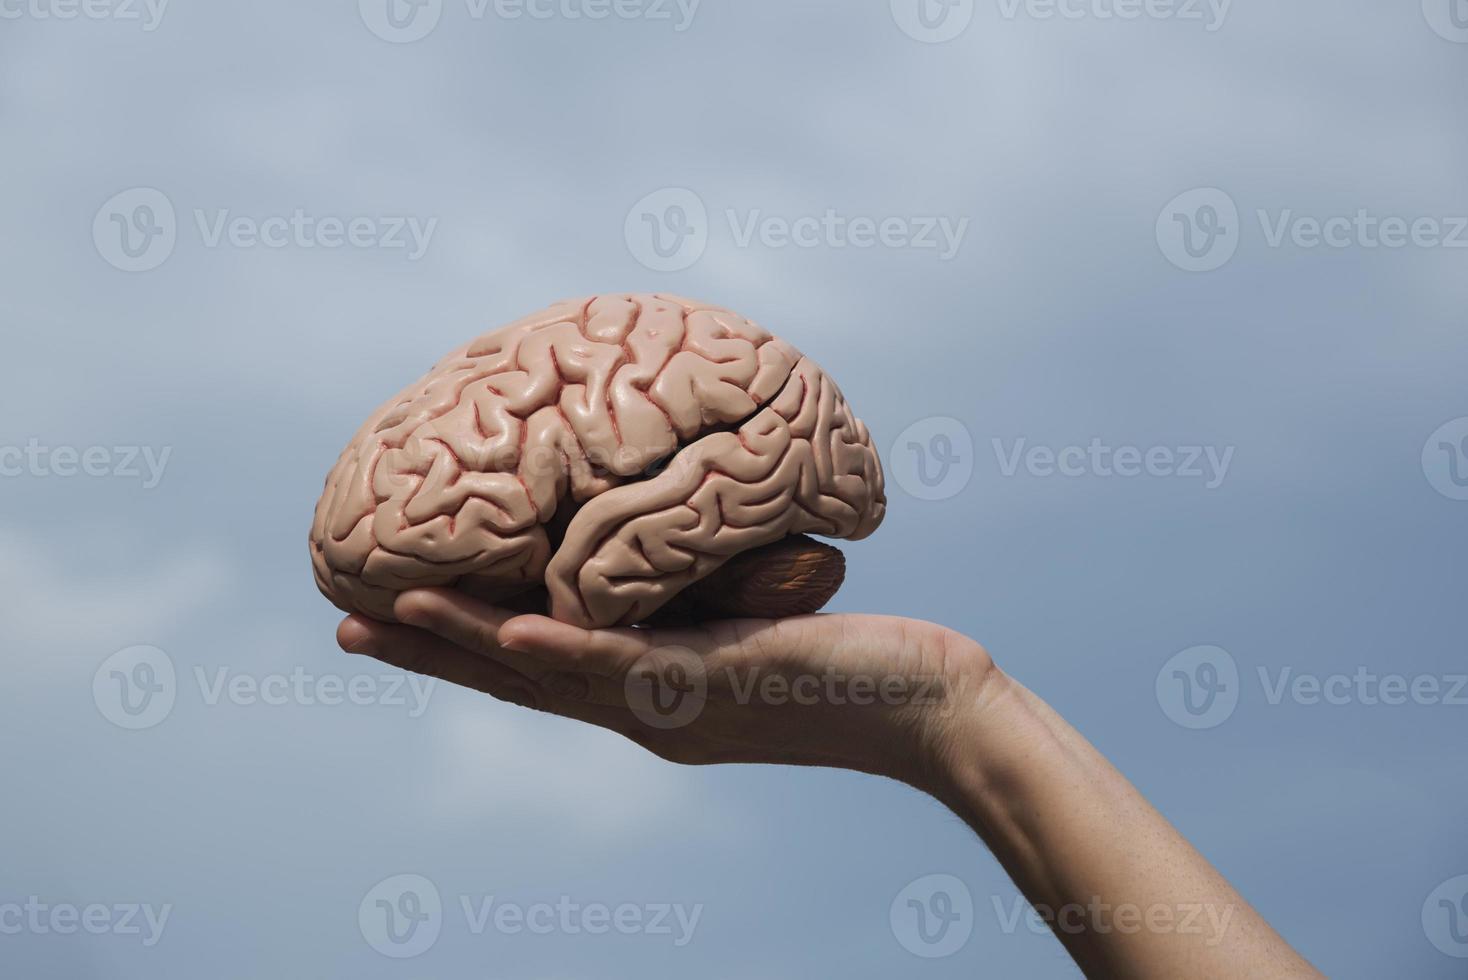 Artificial human brain model and hand holding photo